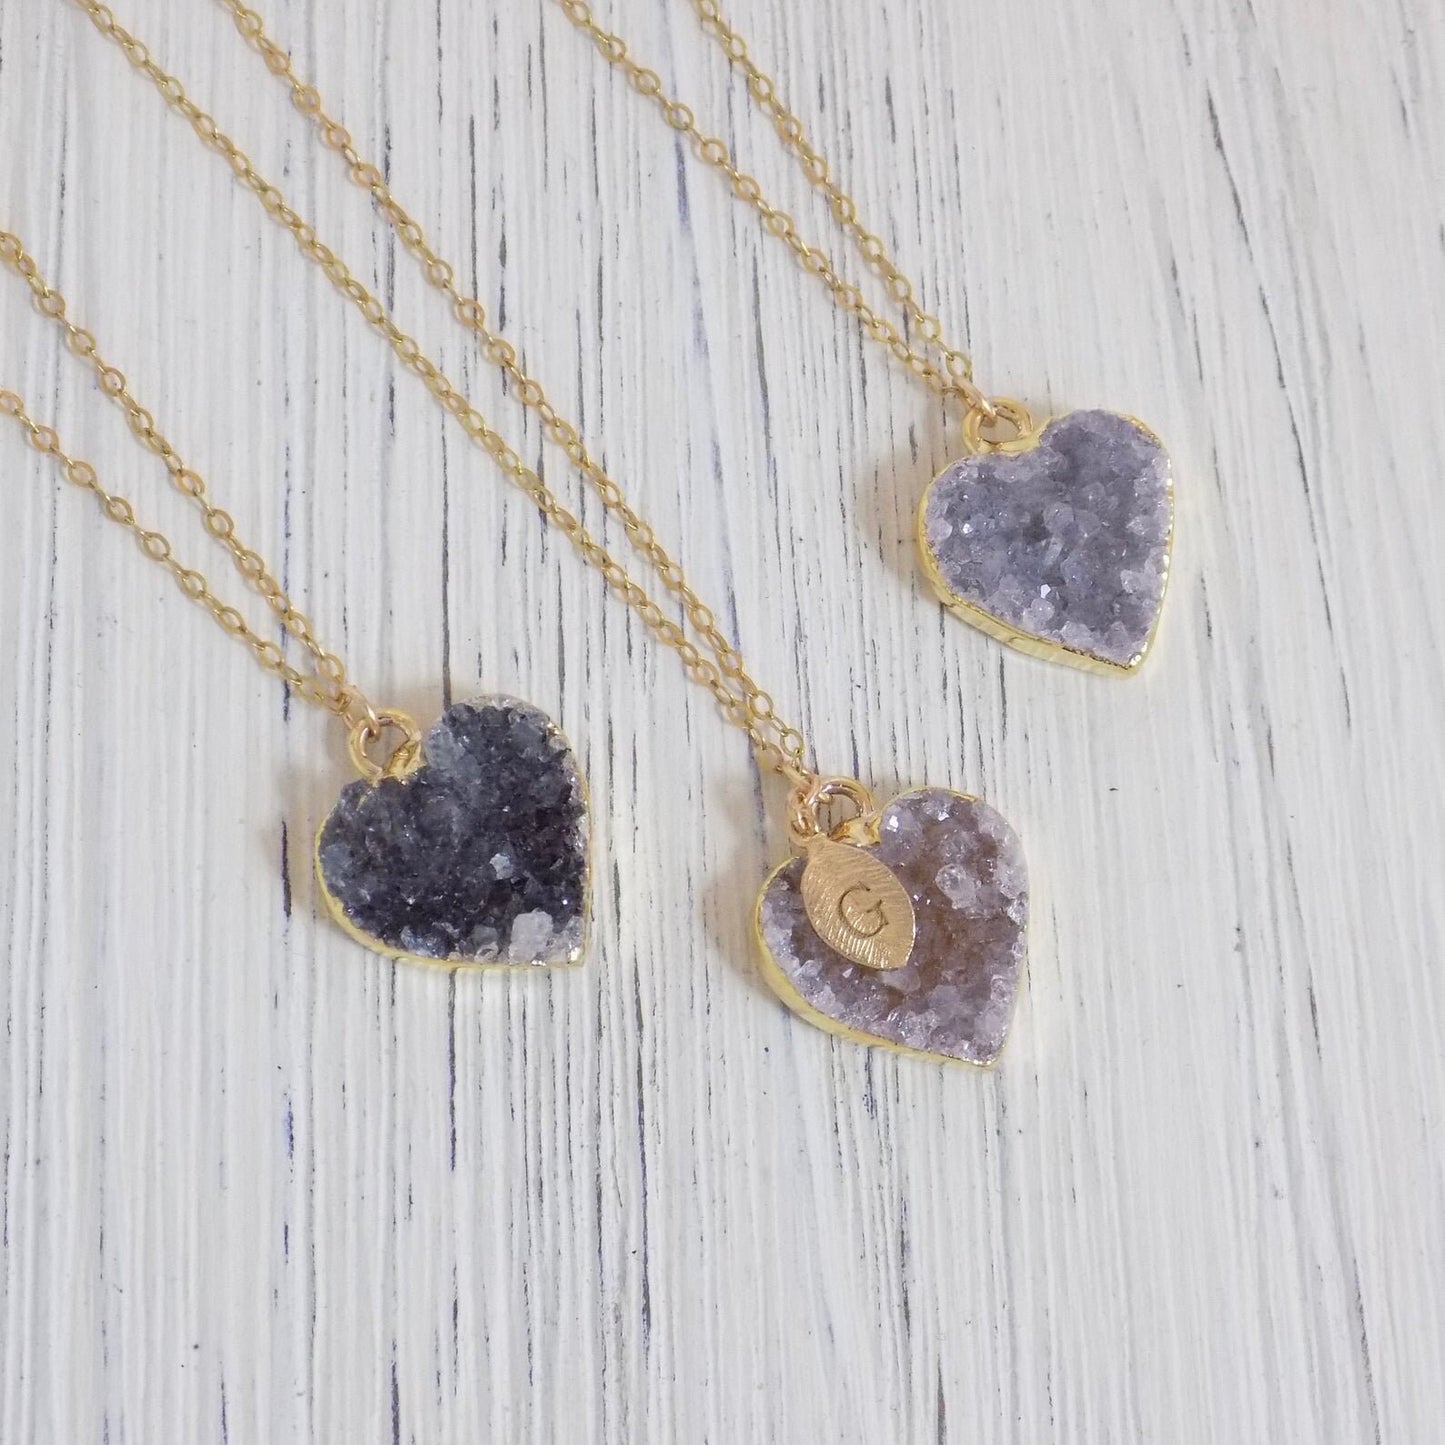 Heart Shaped Druzy Necklace - 14K Gold Filled Chain